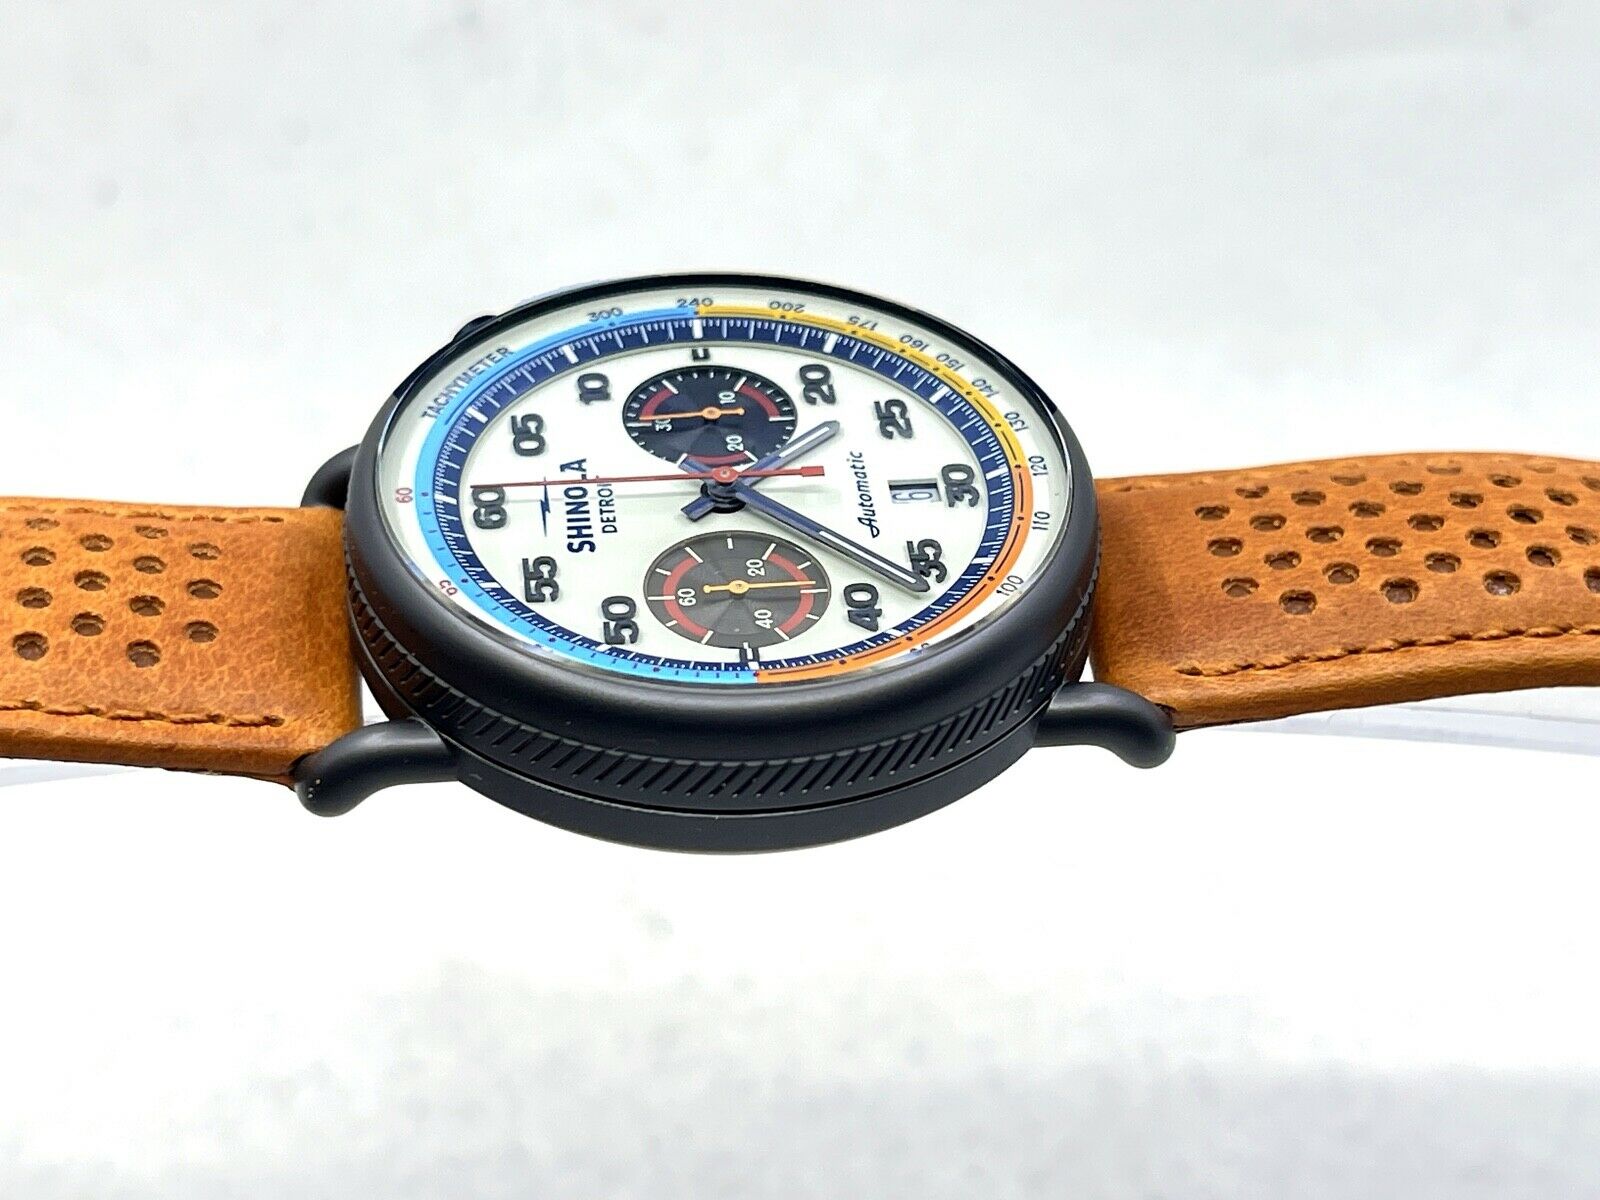 The Canfield Speedway 44mm